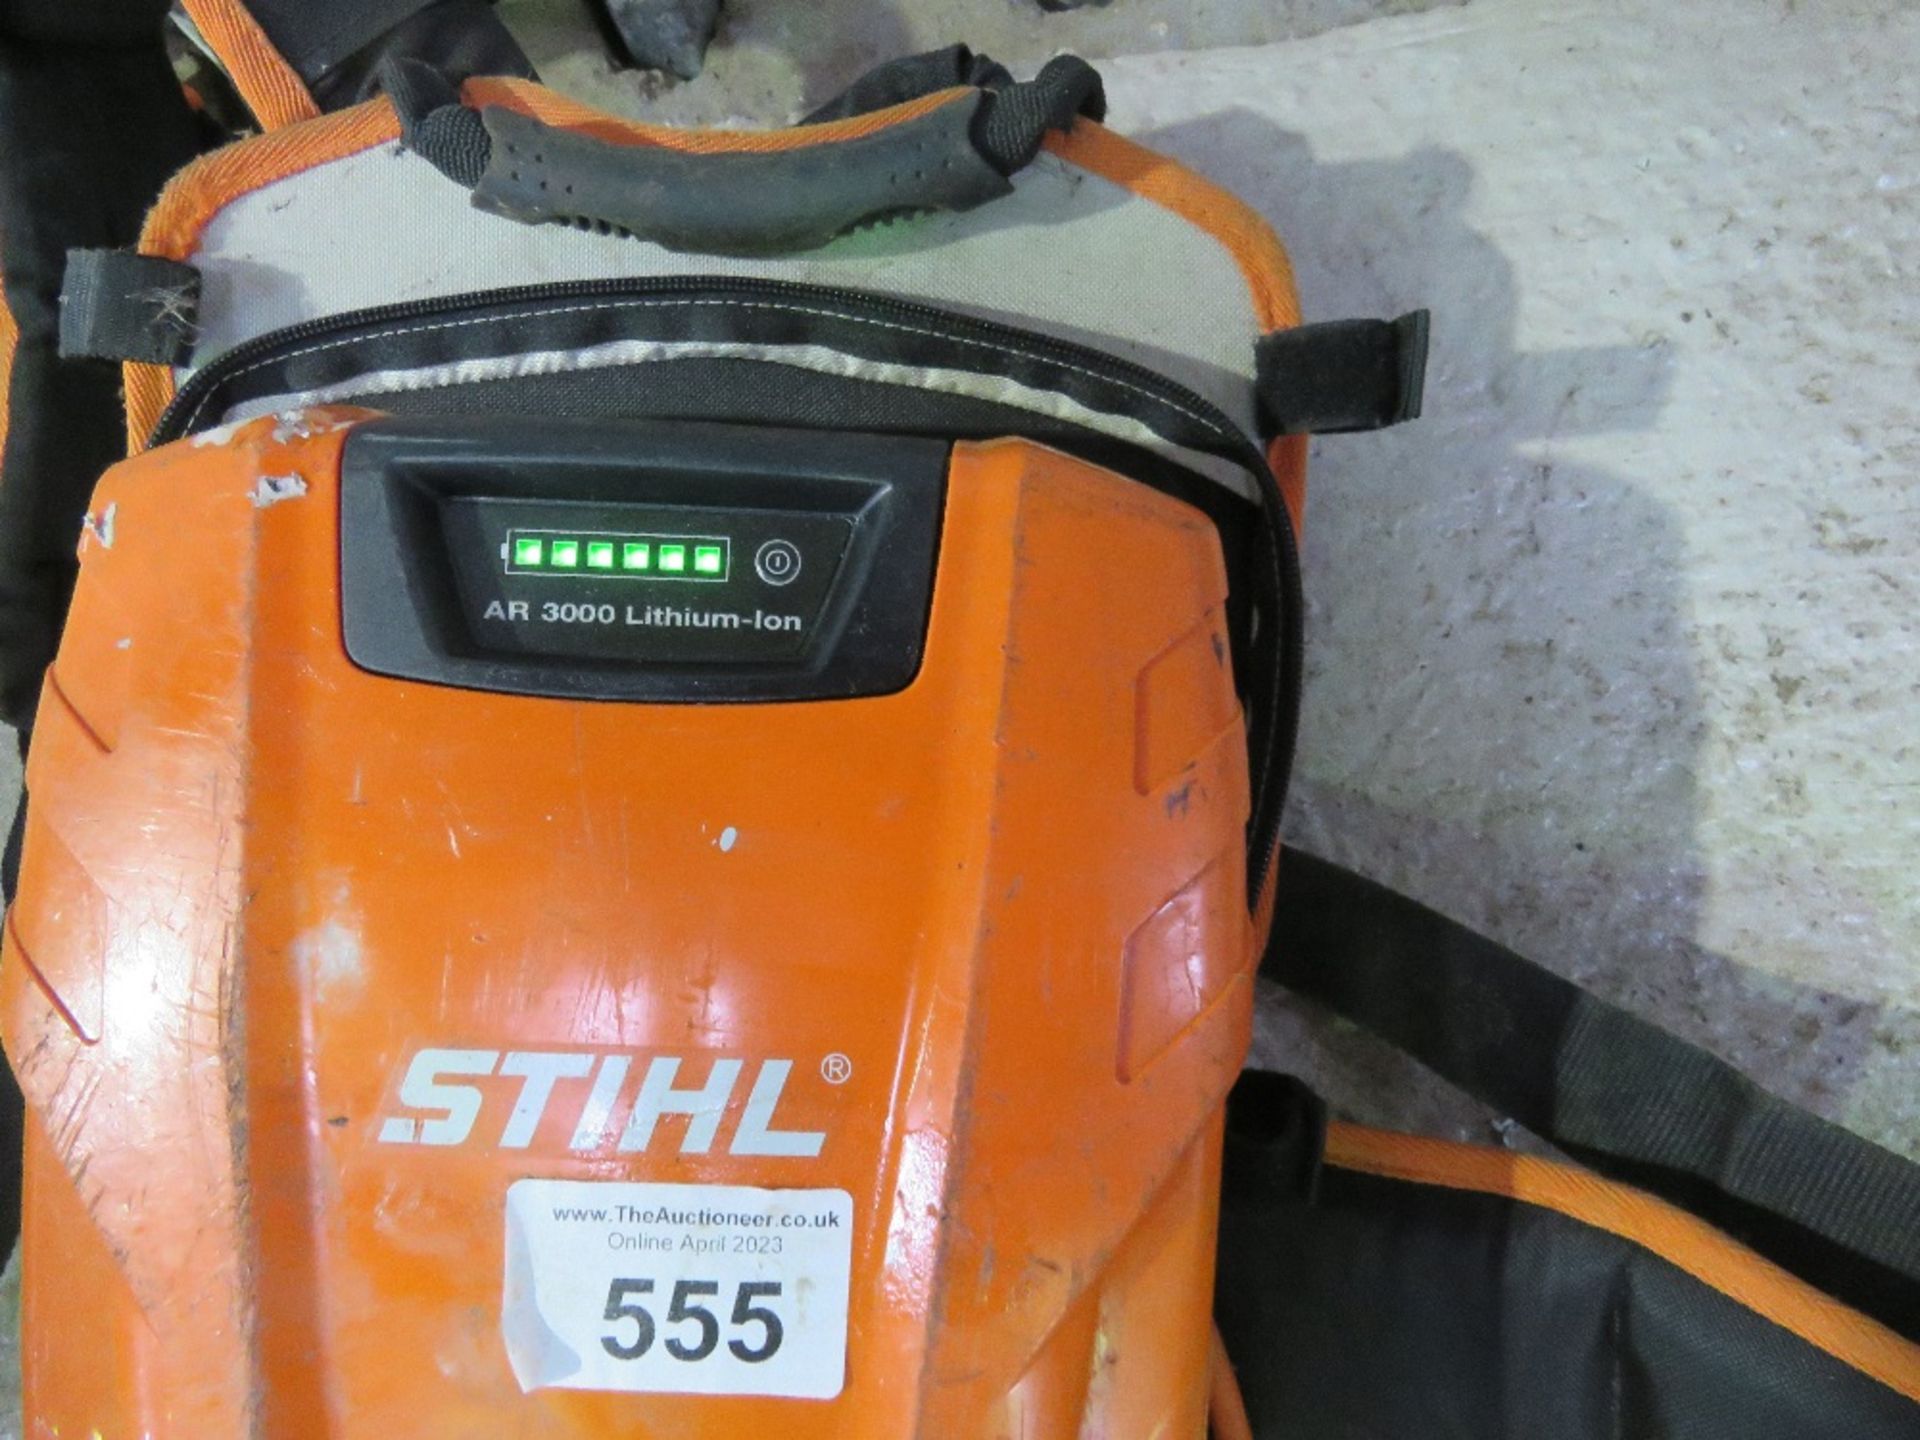 STIHL BATTERY POWERED TELESCOPIC POLE HLA85 HEDGE TRIMMER SUPPLIED WITH AN AR3000 LITHIUM BACK PAC - Image 3 of 6